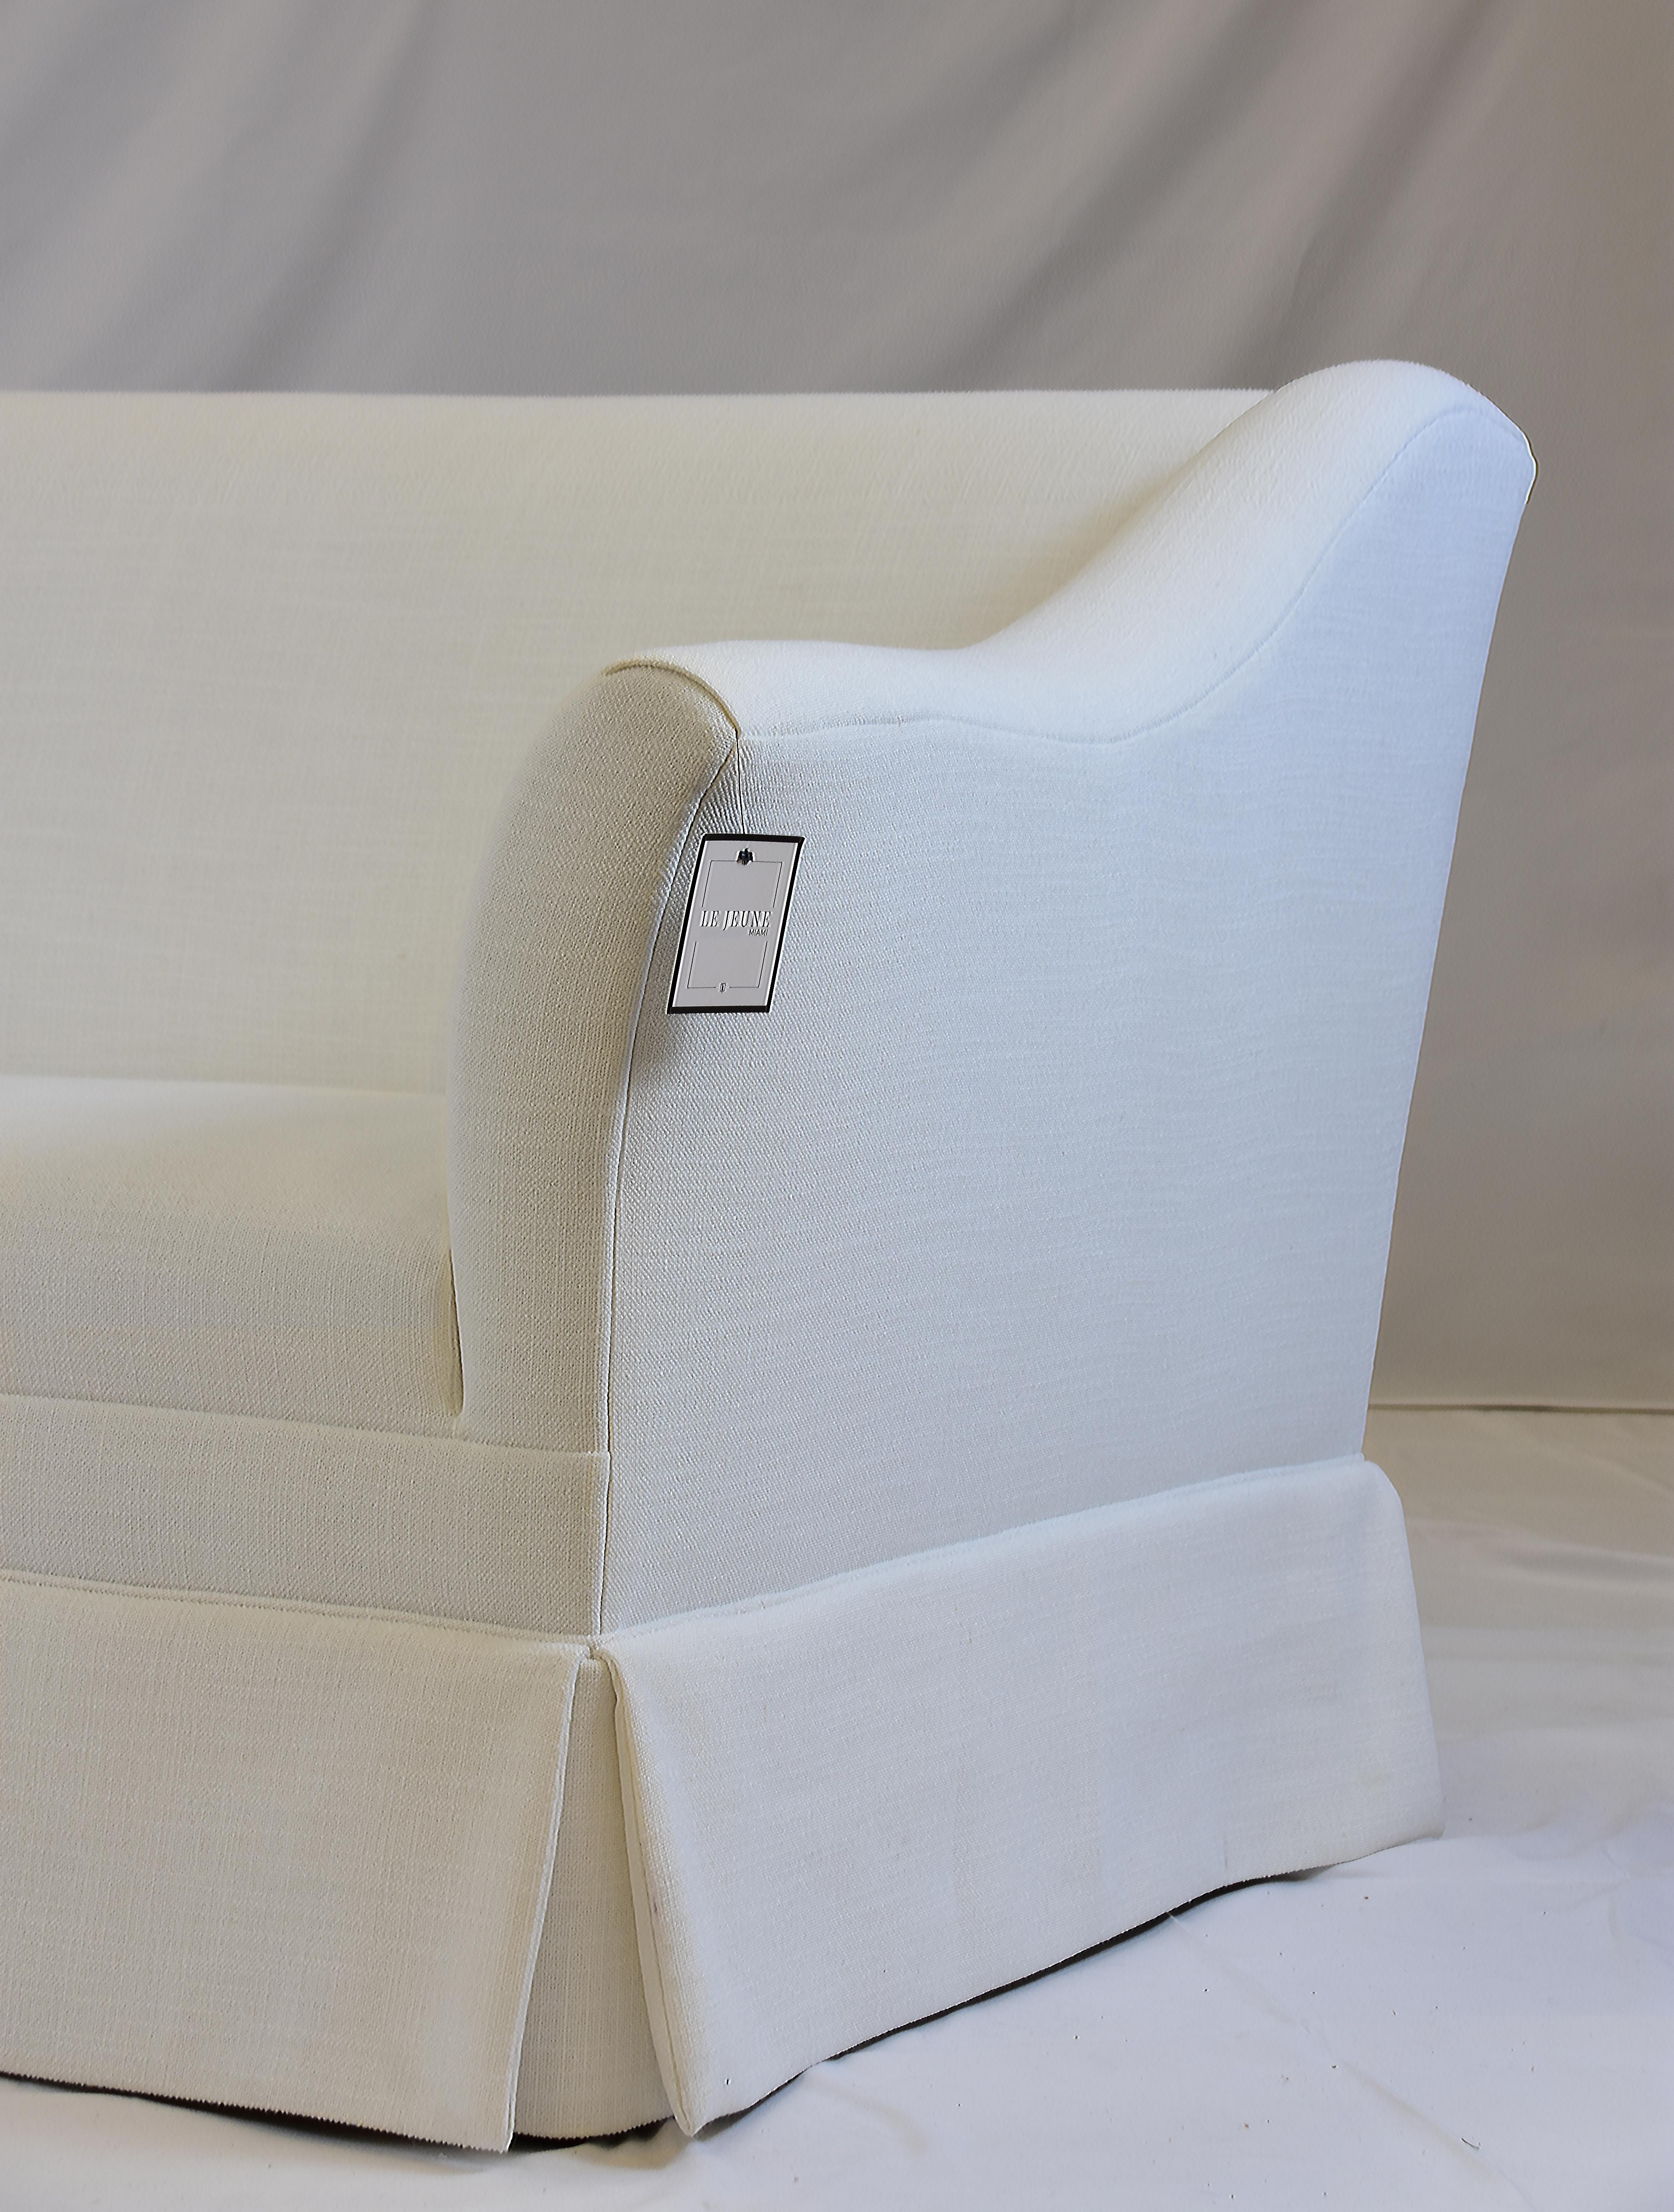 Contemporary Le Jeune Upholstery Lucca Sofa Showroom Model in White Linen